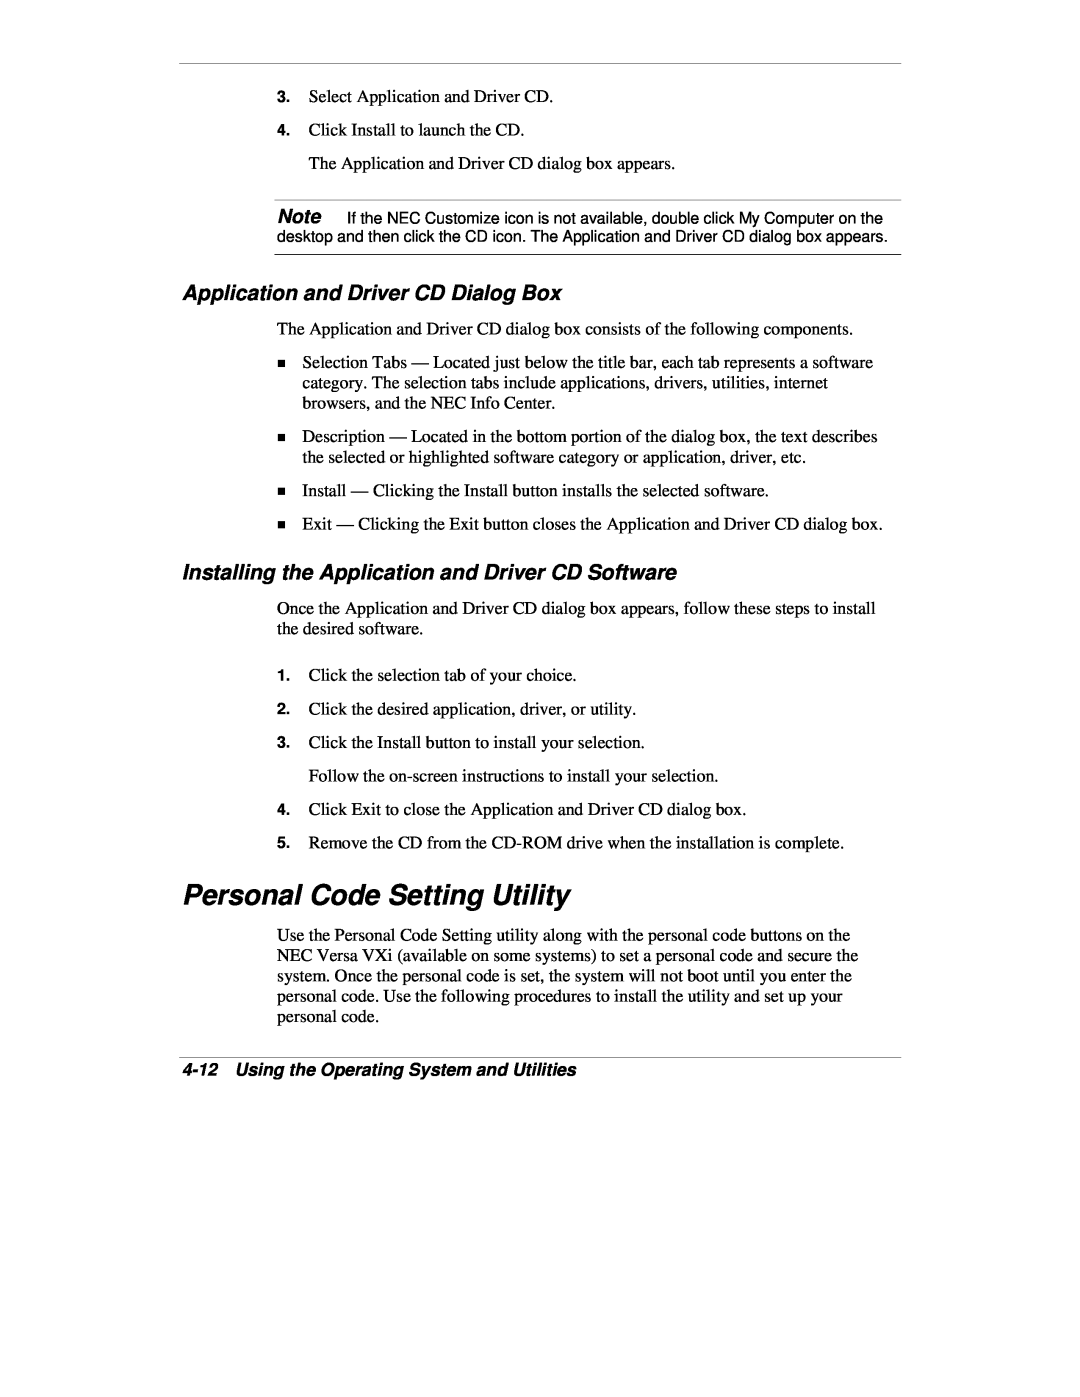 NEC VXi Personal Code Setting Utility, Application and Driver CD Dialog Box, 4-12Using the Operating System and Utilities 